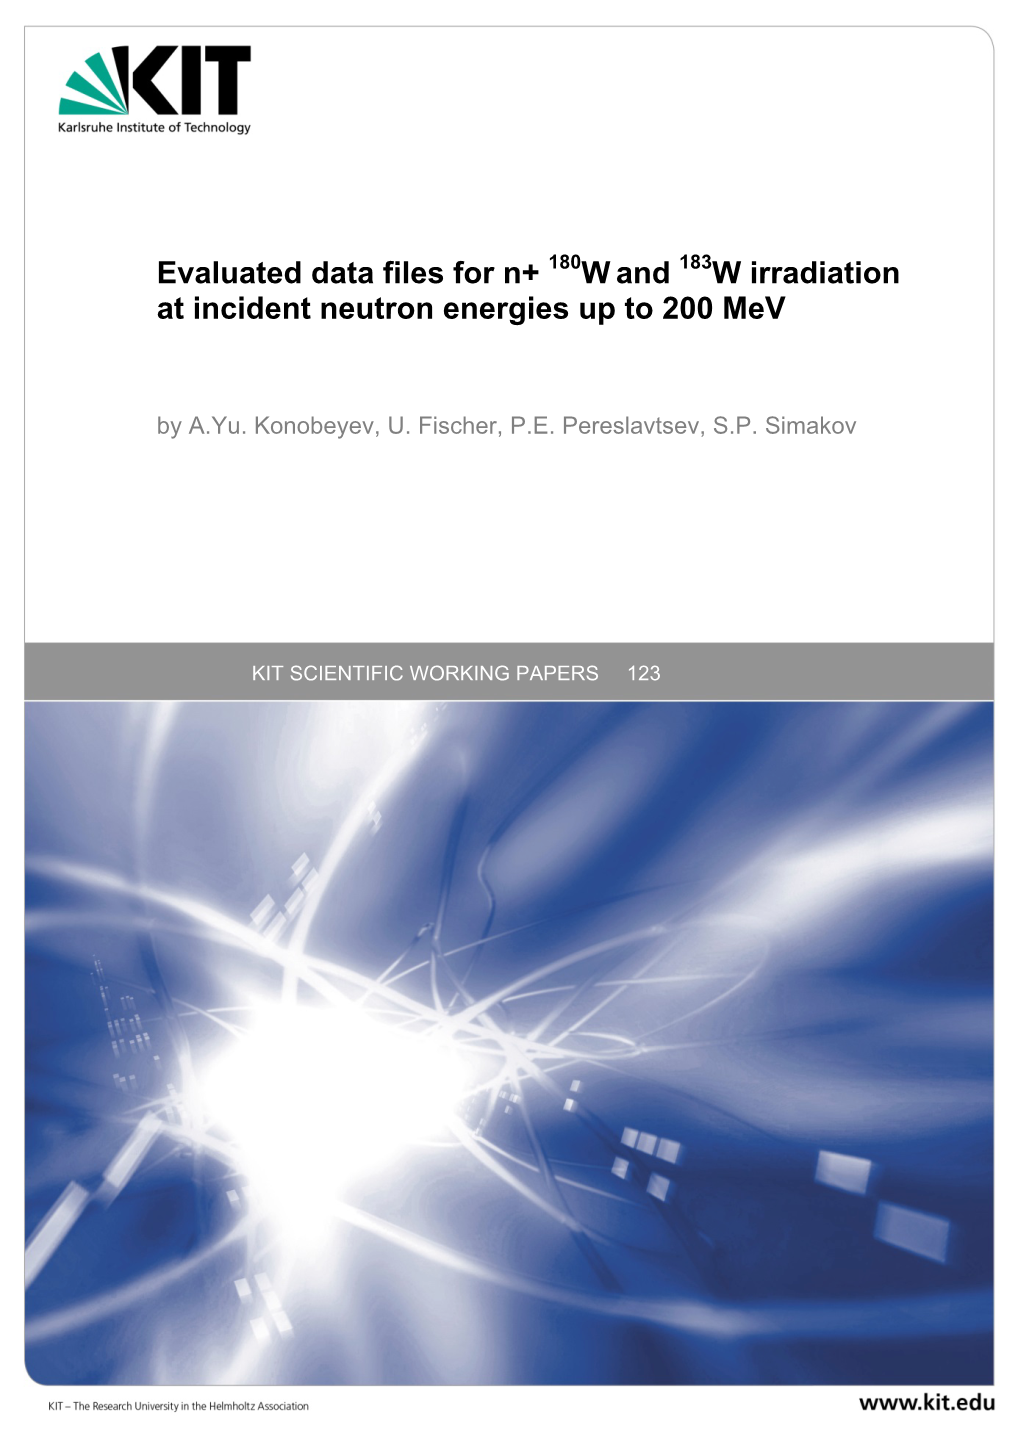 Evaluated Data Files for N+ W and W Irradiation at Incident Neutron